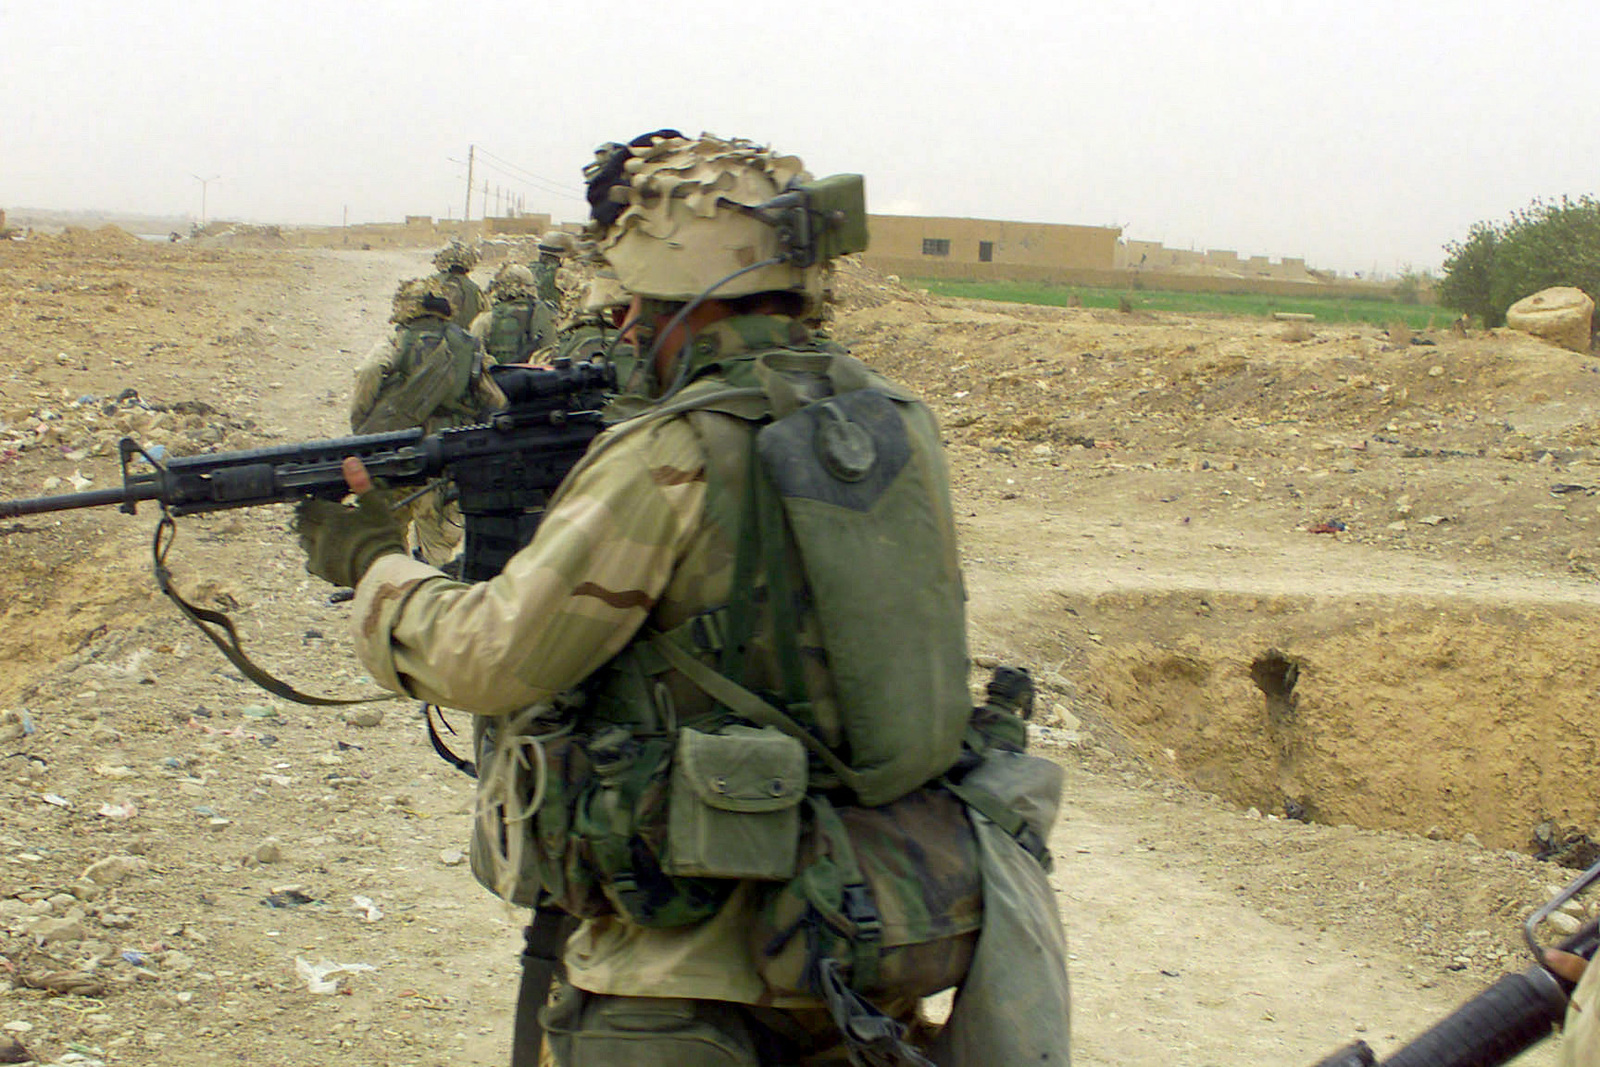 Armed With Colt 556mm M16a2 Assault Rifles Us Marine Corps Usmc Troops From Charlie Company 7093